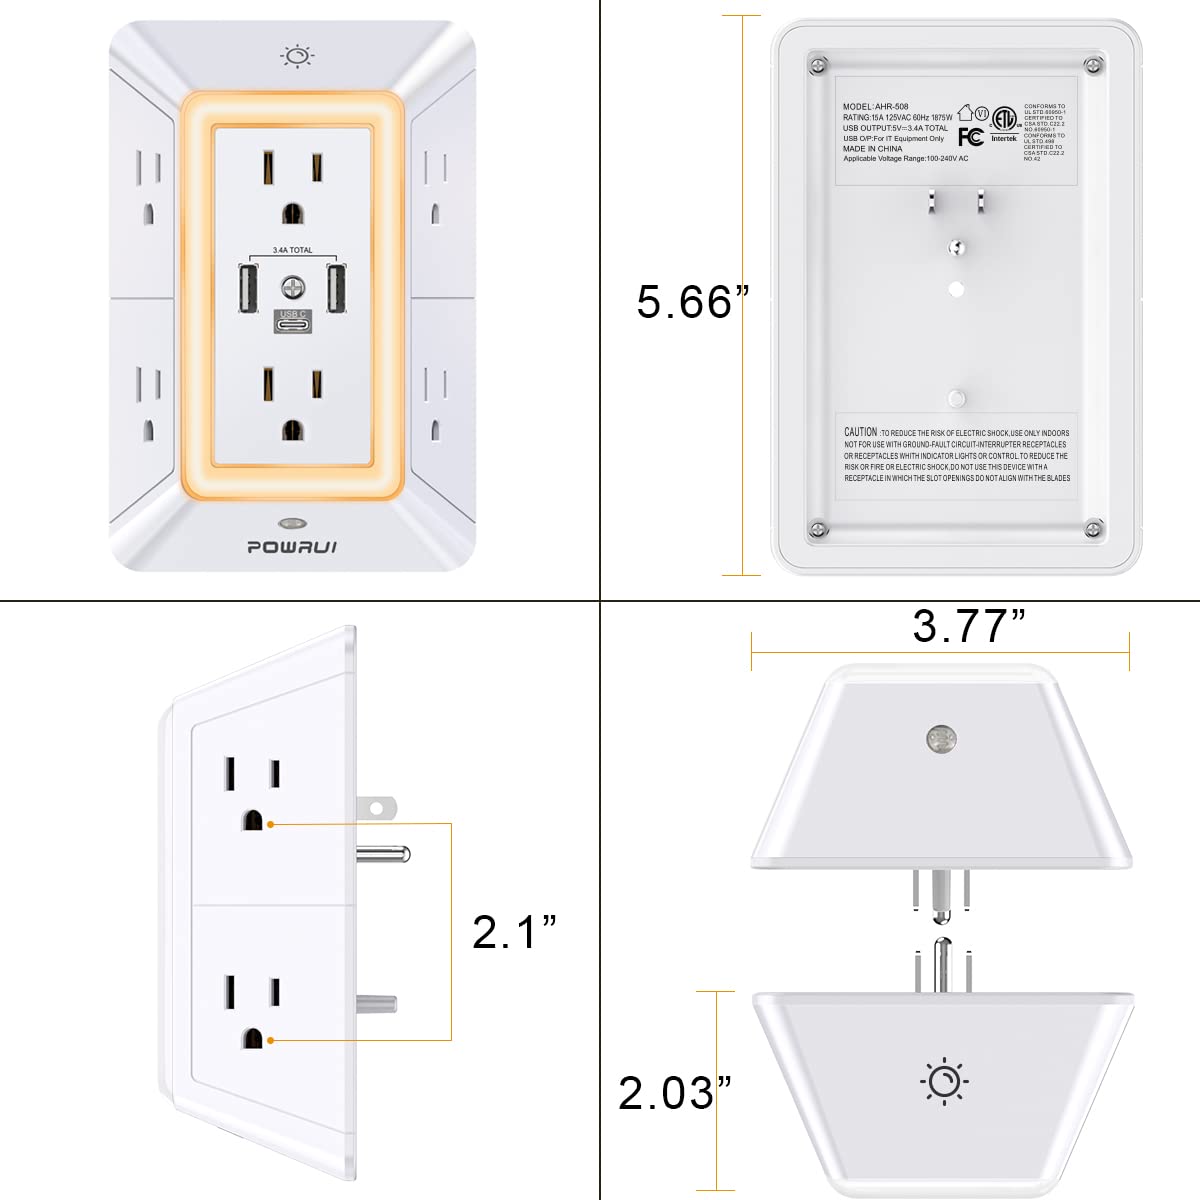 Surge Protector USB Outlet Extender - POWRUI Multi Plug with 6 Outlet Splitter and 3 USB Charging Ports and Night Light,3-Sided Power Strip with Adapter Spaced Outlets - White,ETL